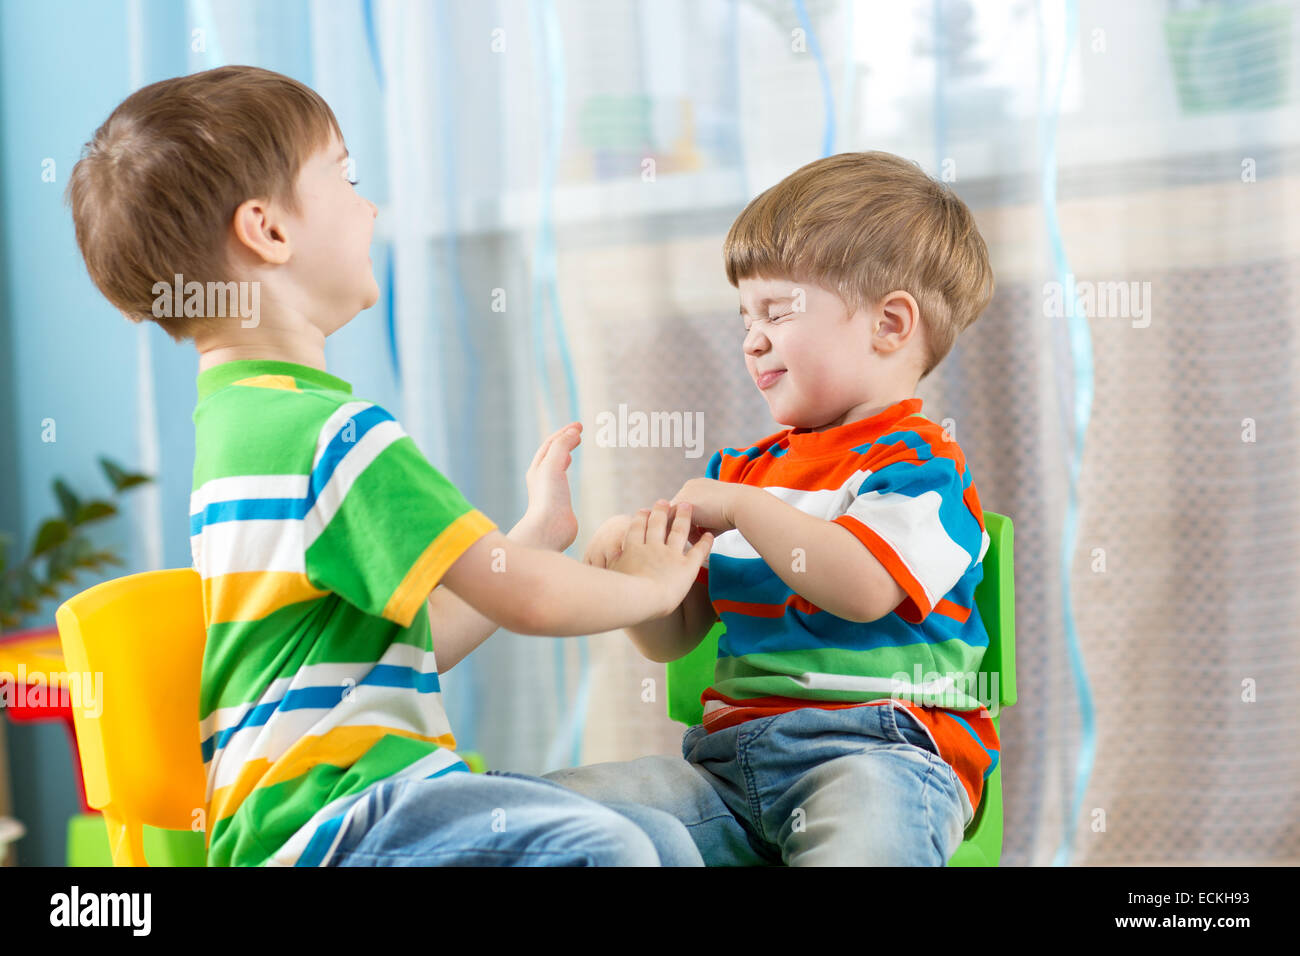 playful kids friends at home Stock Photo